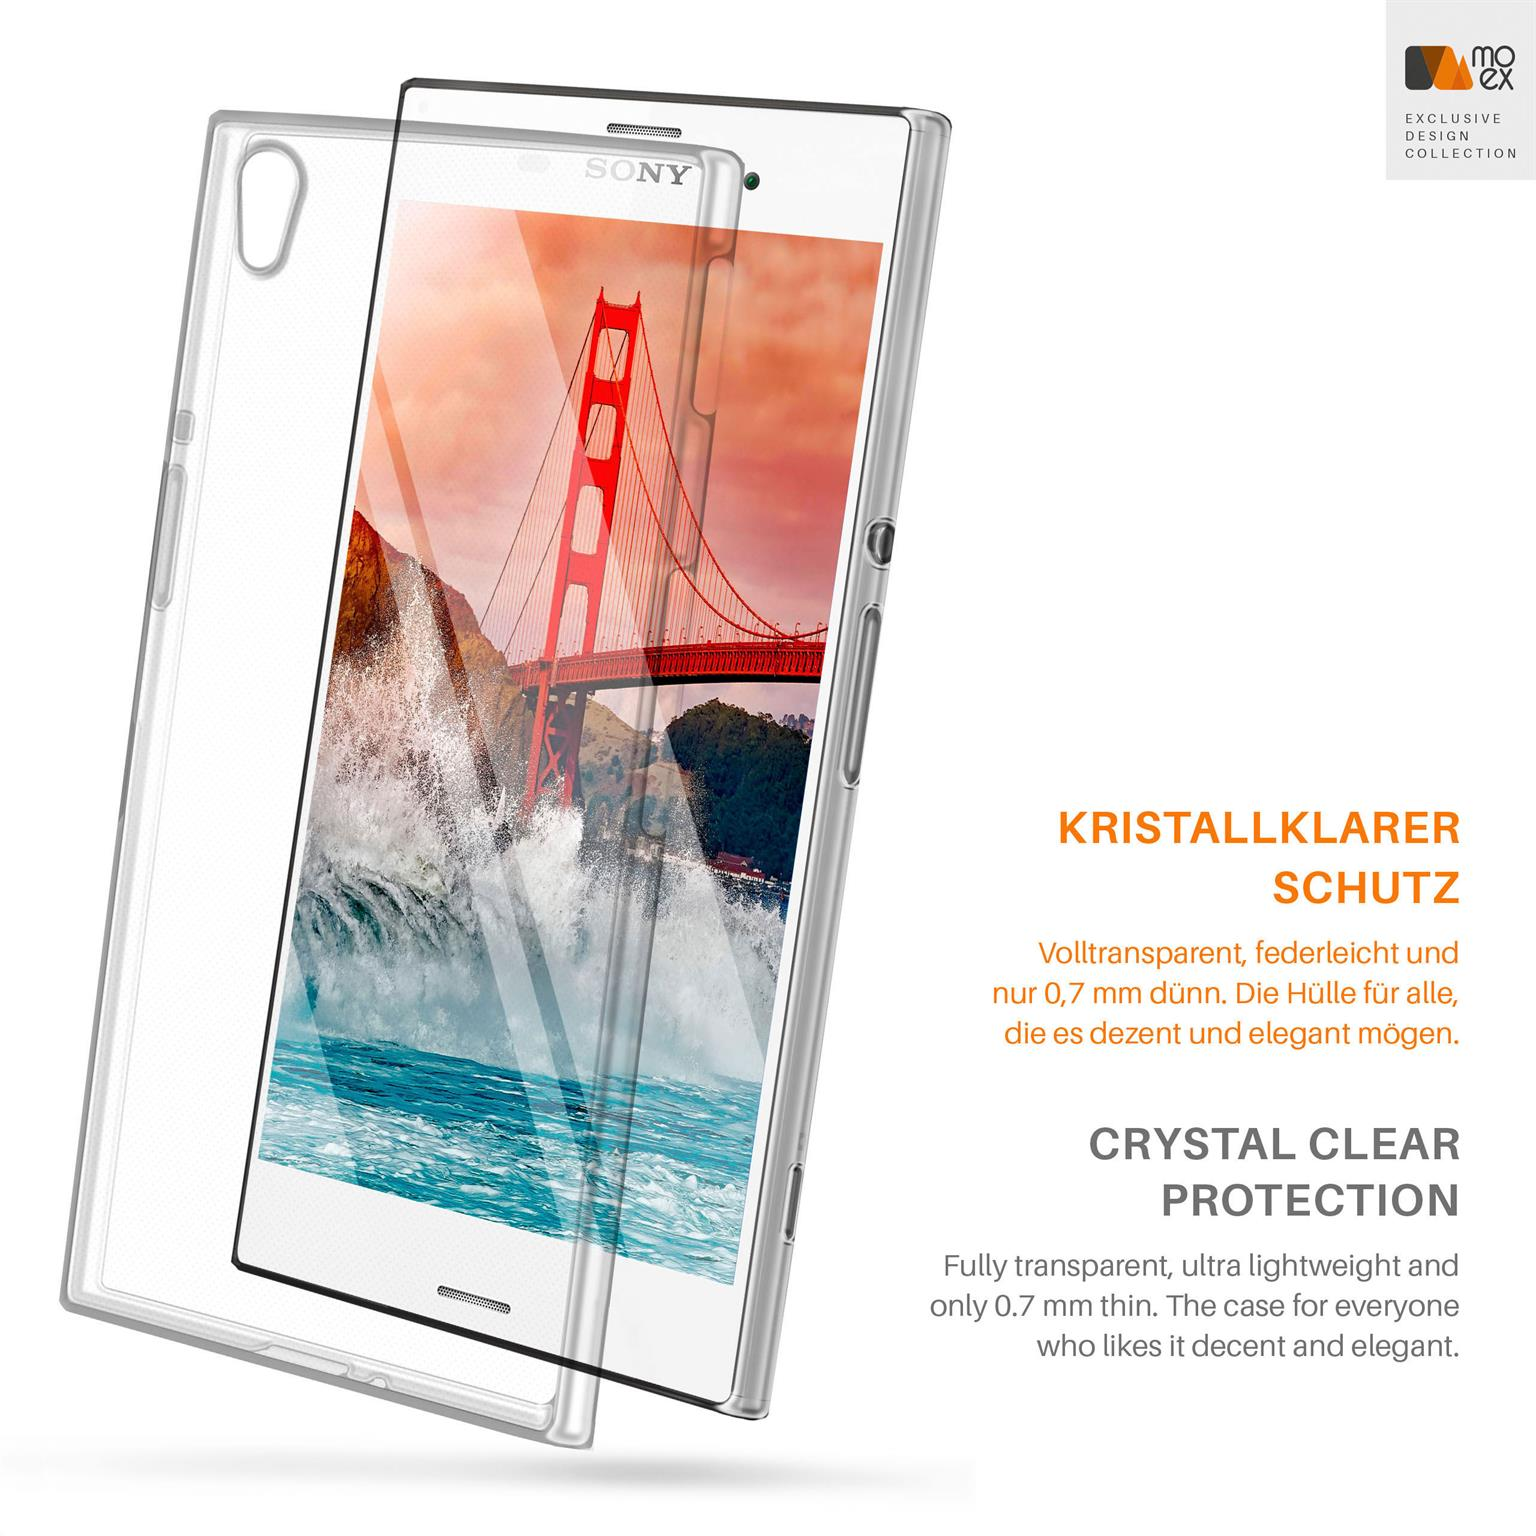 Crystal-Clear Backcover, Xperia Aero Case, Z1, MOEX Sony,